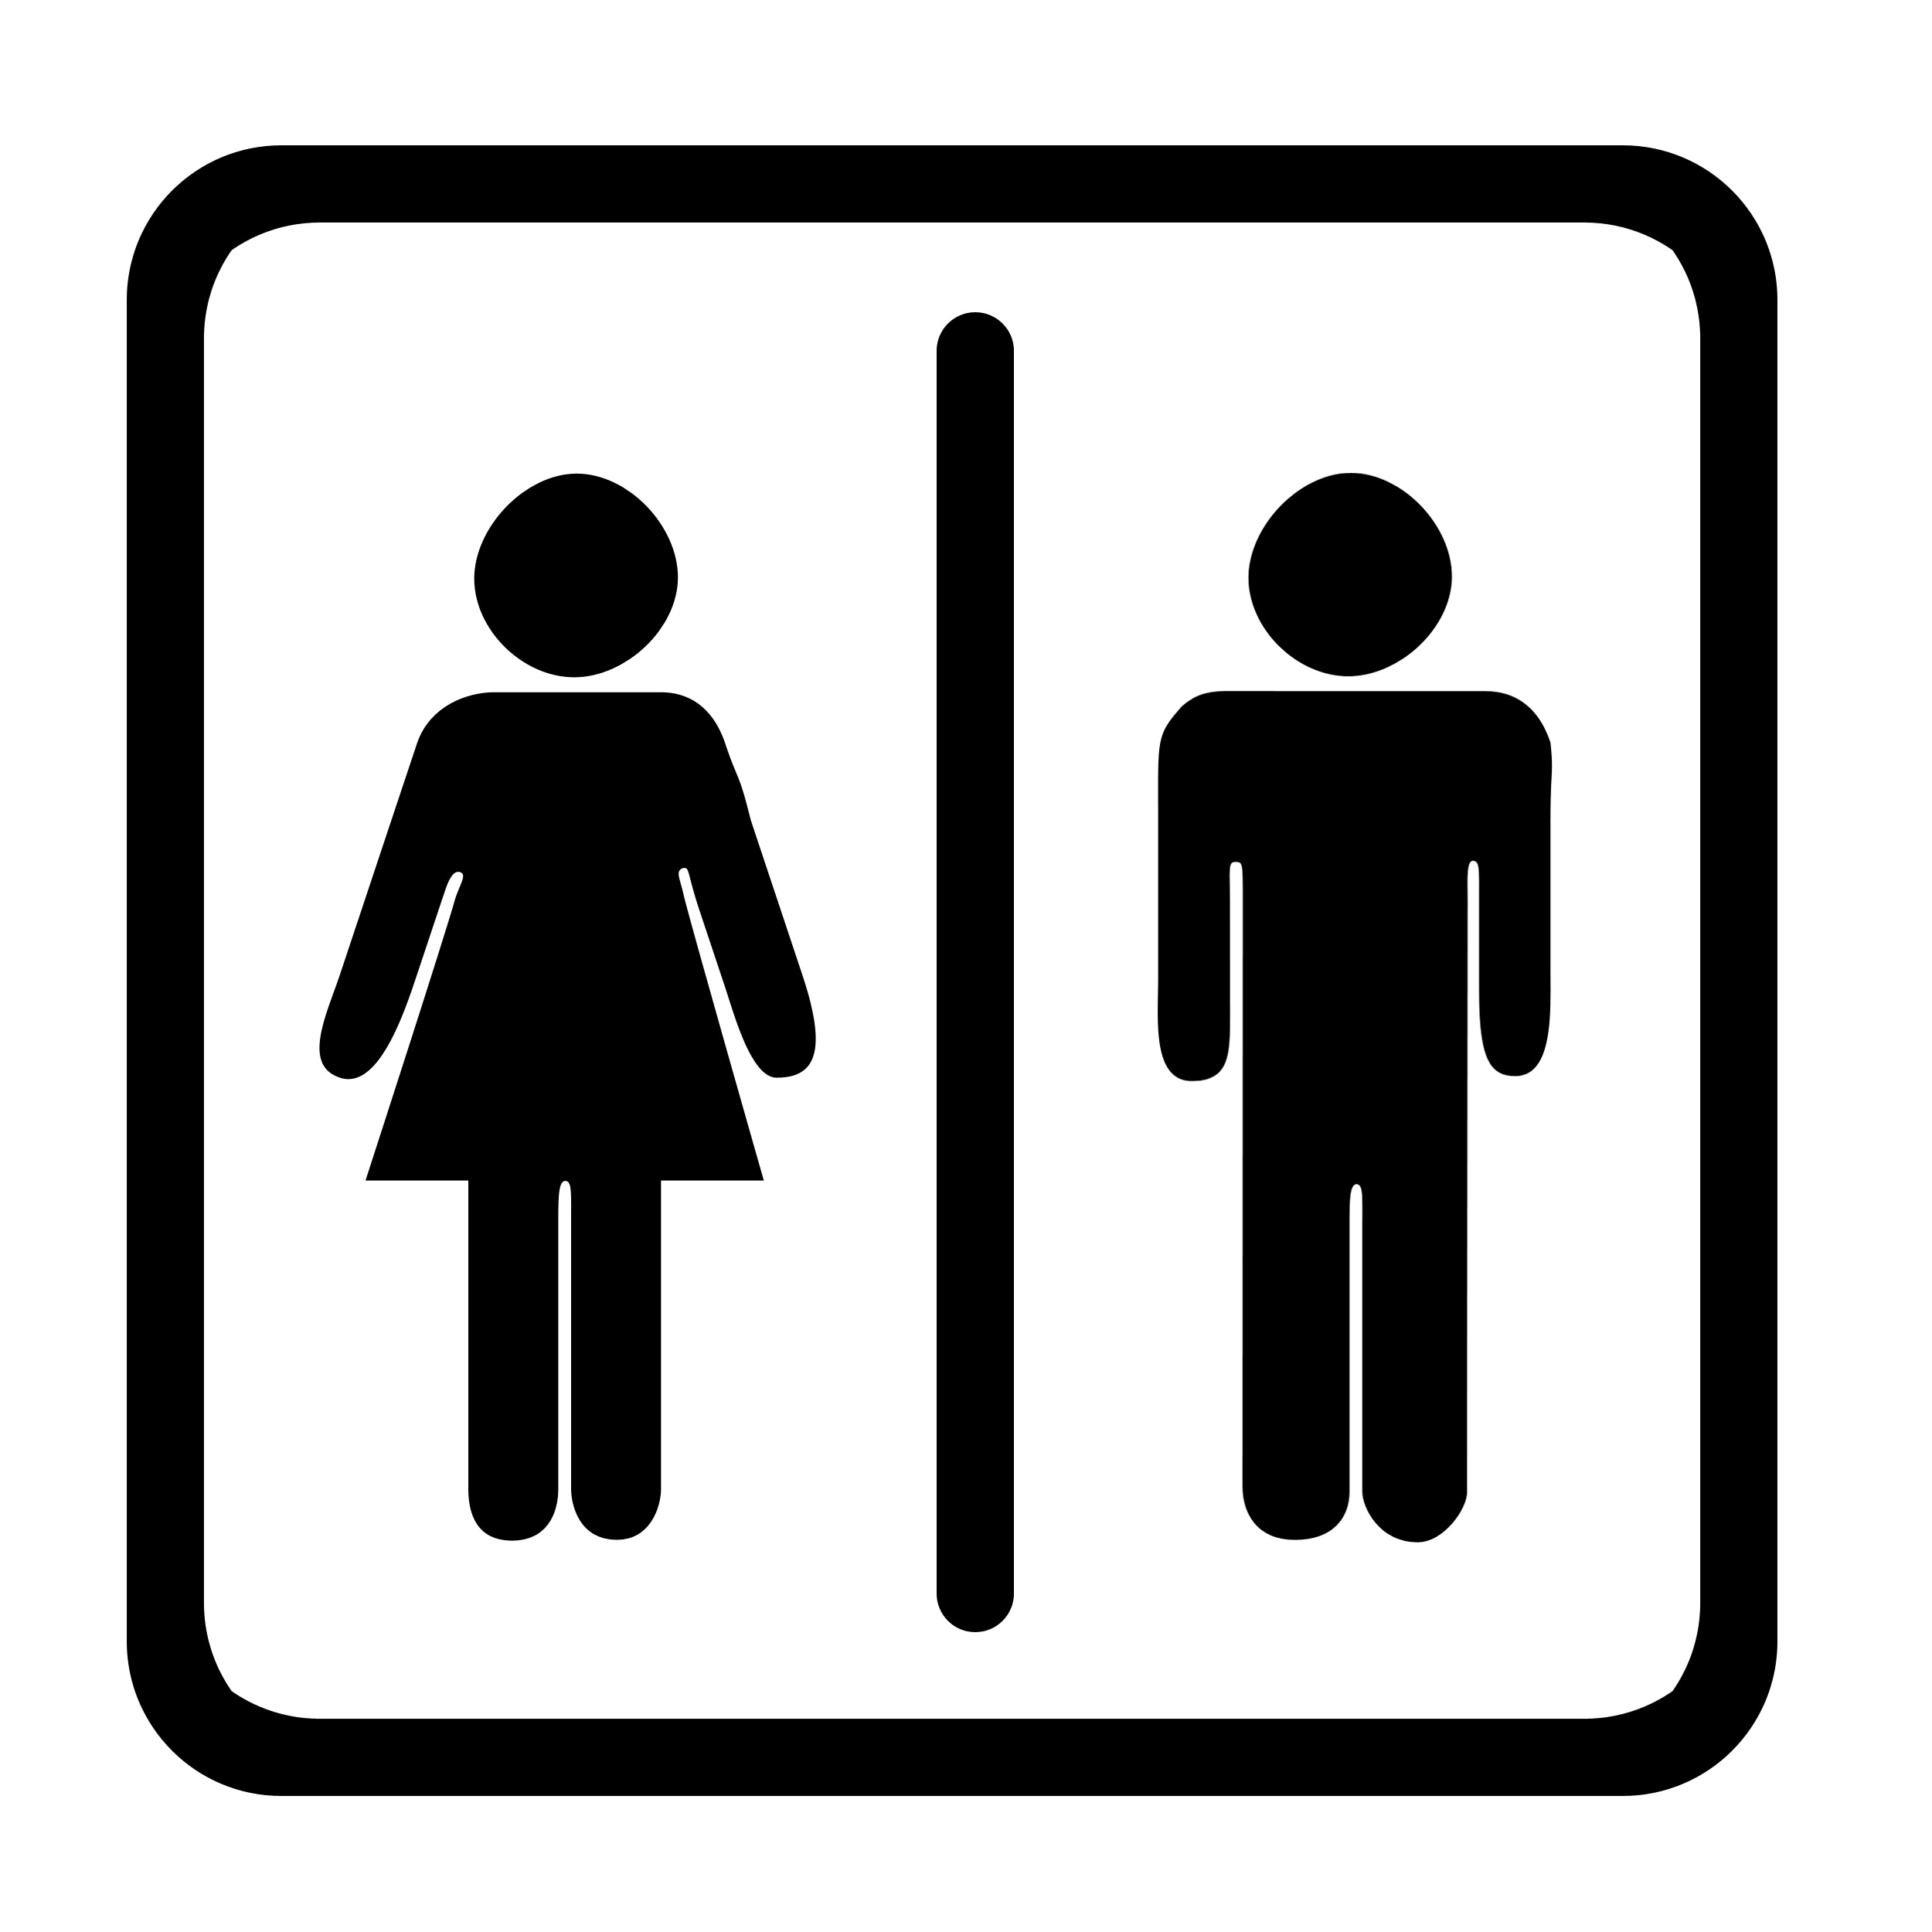 12 Toilet Sign Free Cliparts That You Can Download To You Computer And